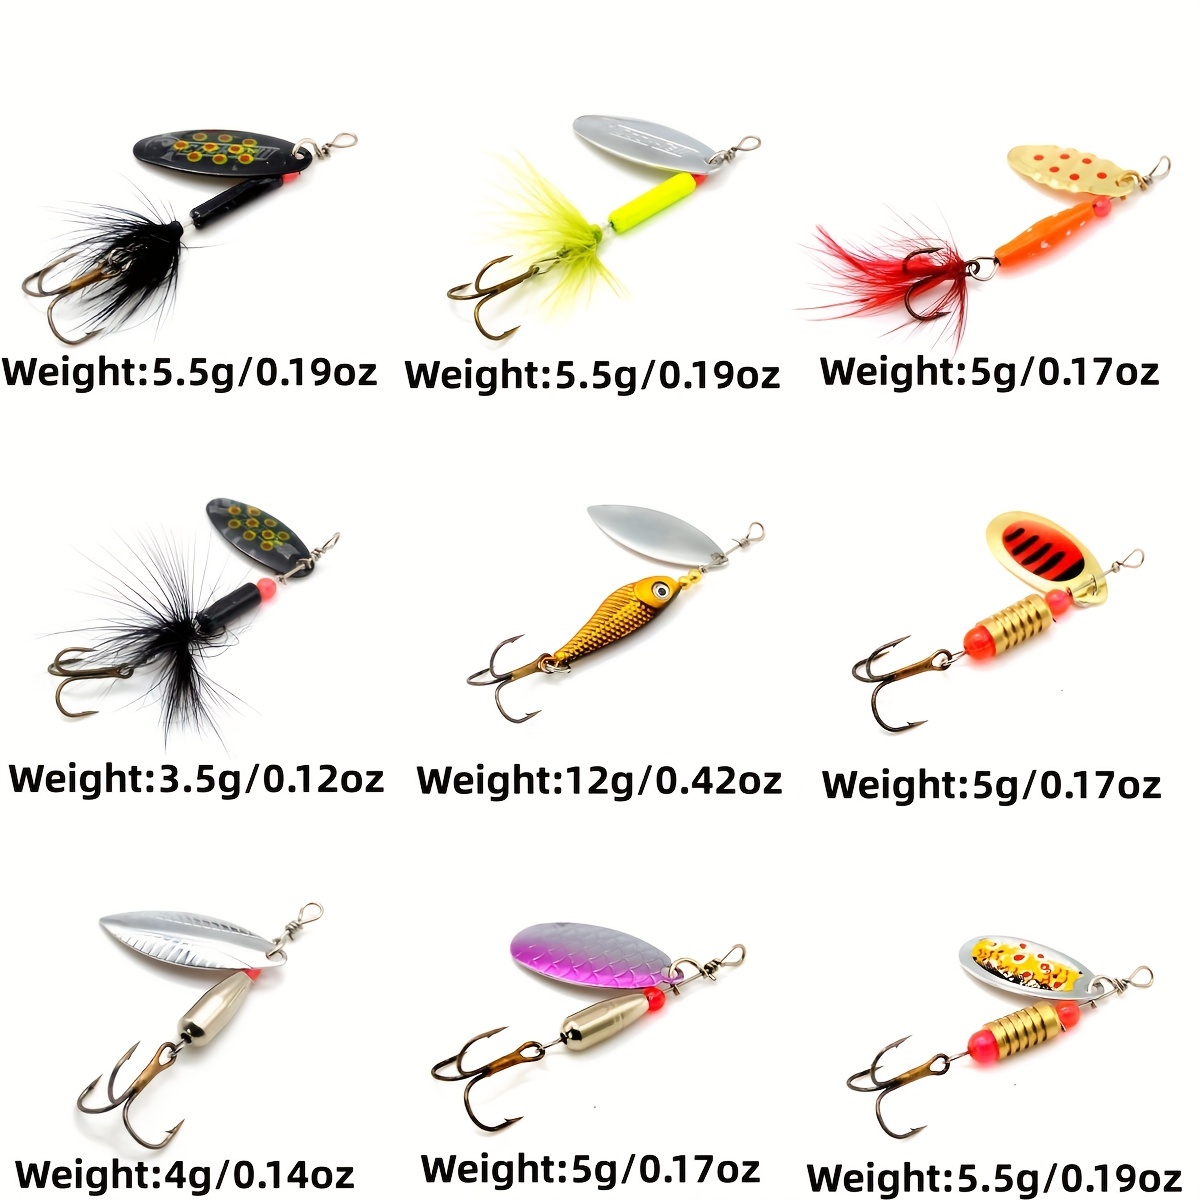  N++A Fishing Lures Spinnerbait for Bass Trout Salmon Walleye  Pike Freshwater Saltwater Fishing Hard Metal Spinner Baits Kit with Tackle  Box 10 pcs # Type C : Sports & Outdoors